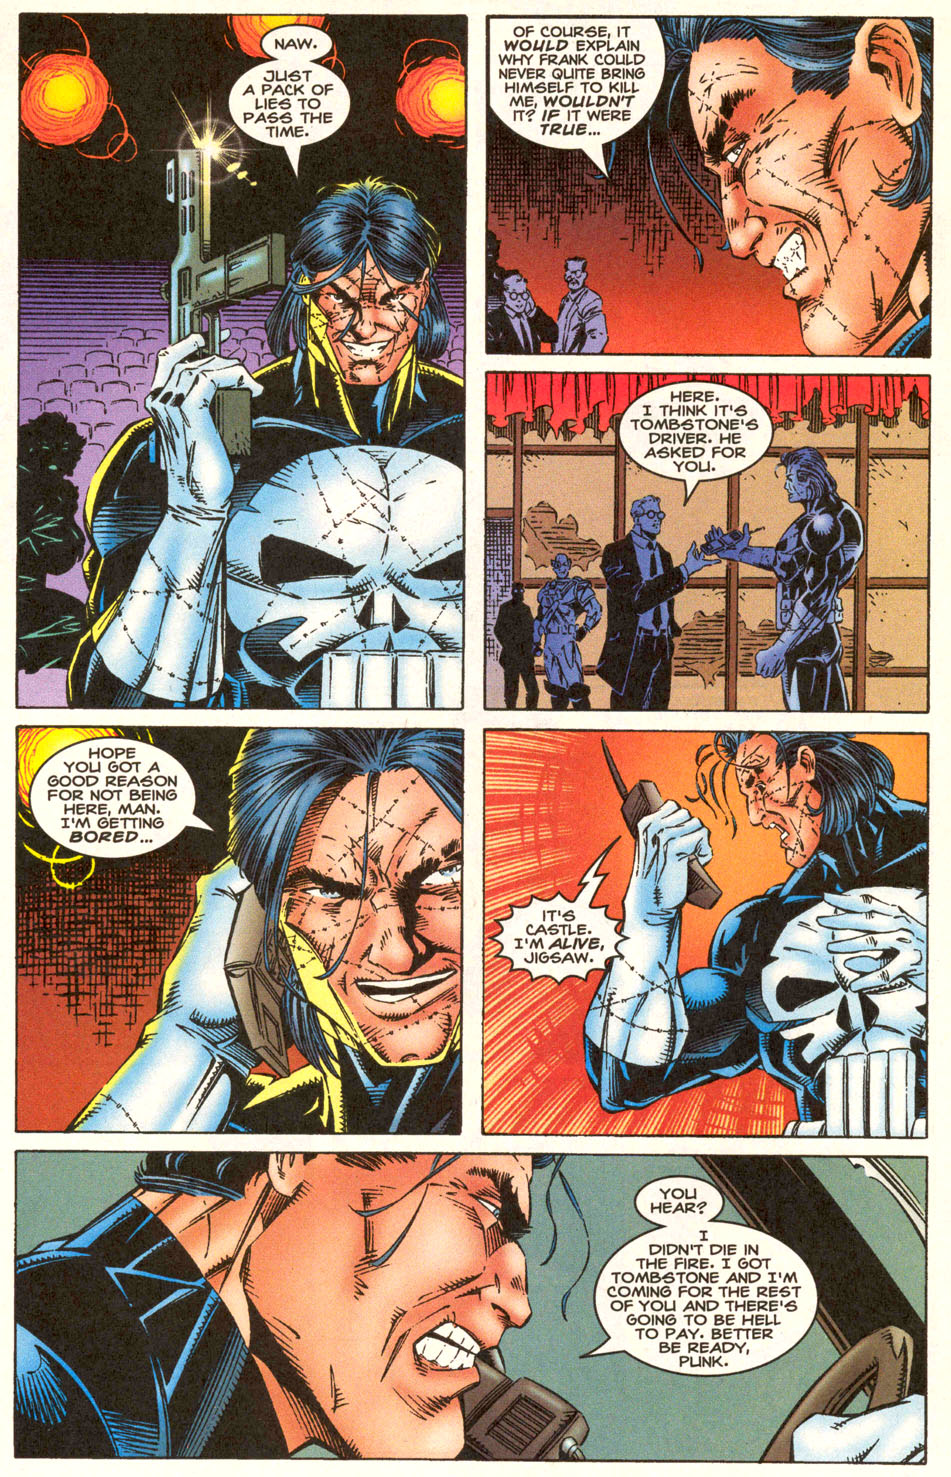 Punisher (1995) issue 10 - Last Shot Fired - Page 12